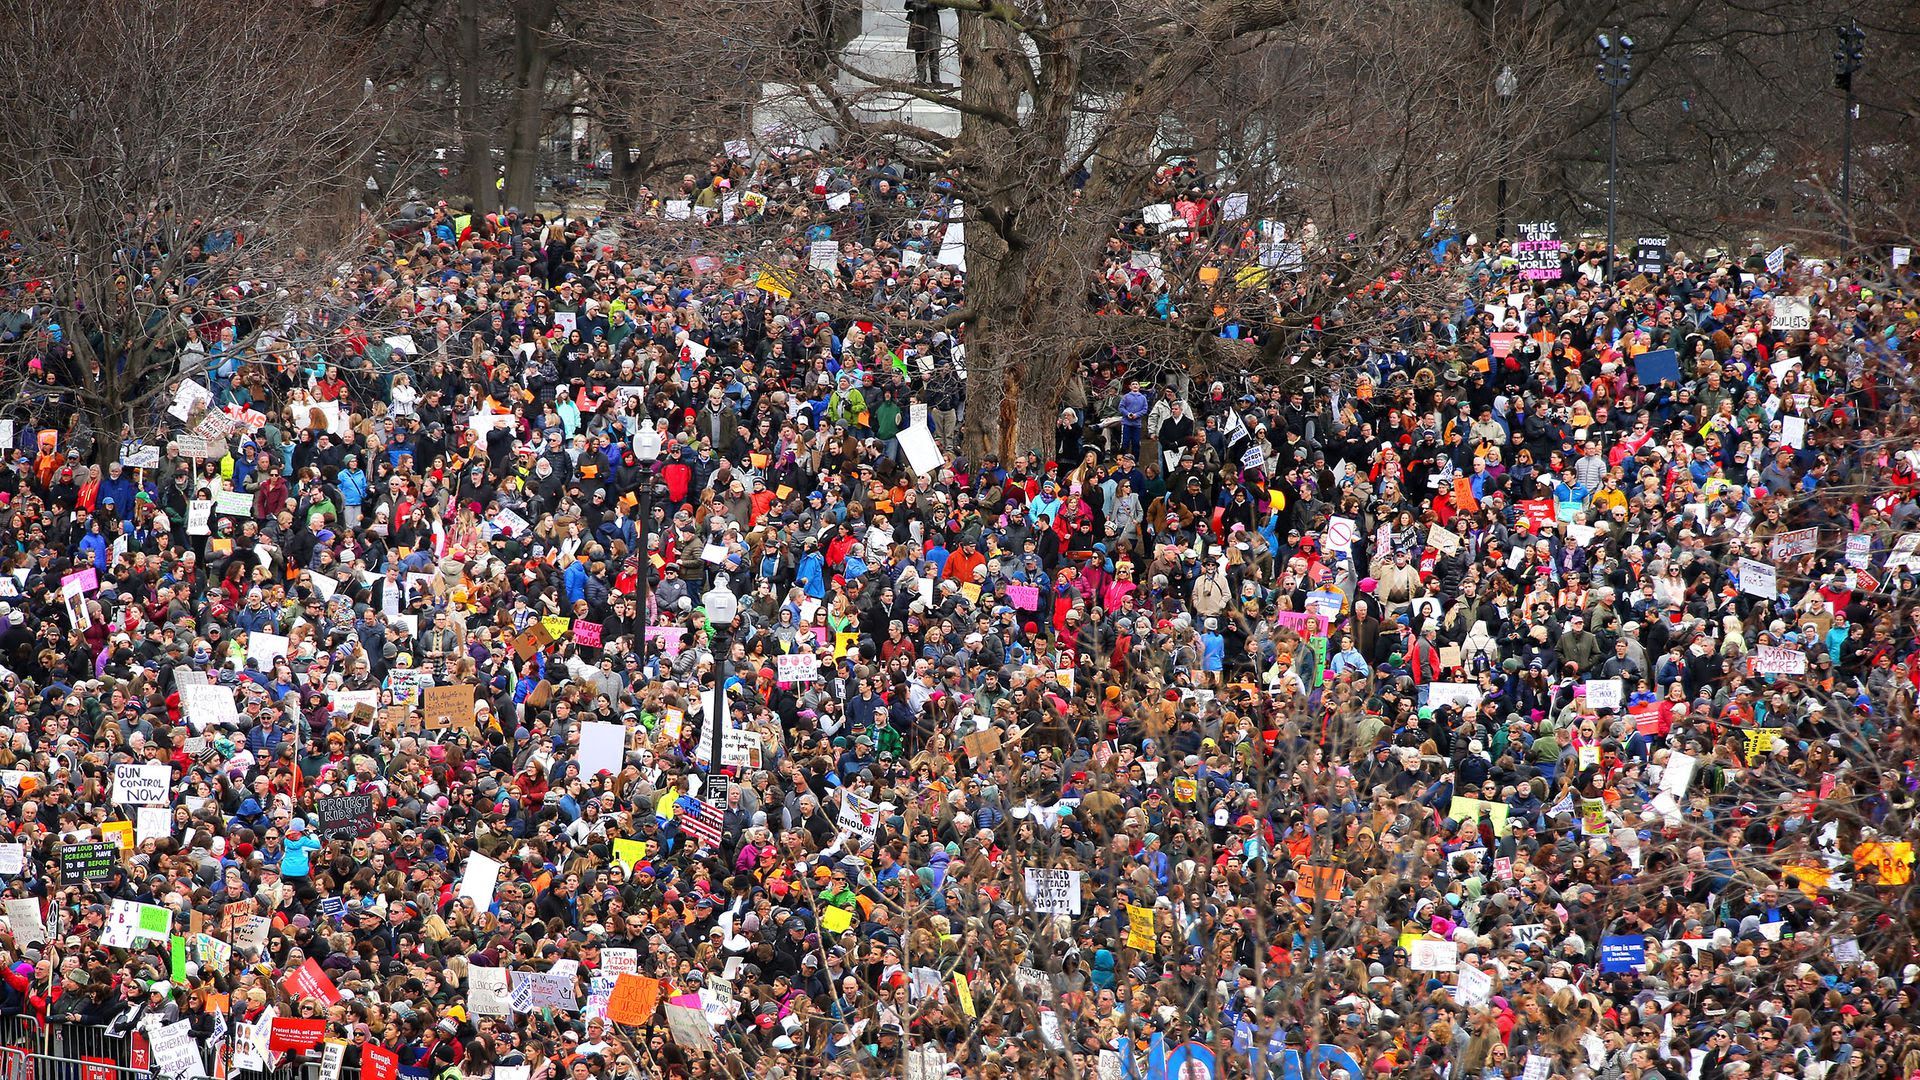 March For Our Lives at Boston Common on March 24 (John Tlumacki / Boston Globe via Getty Images)